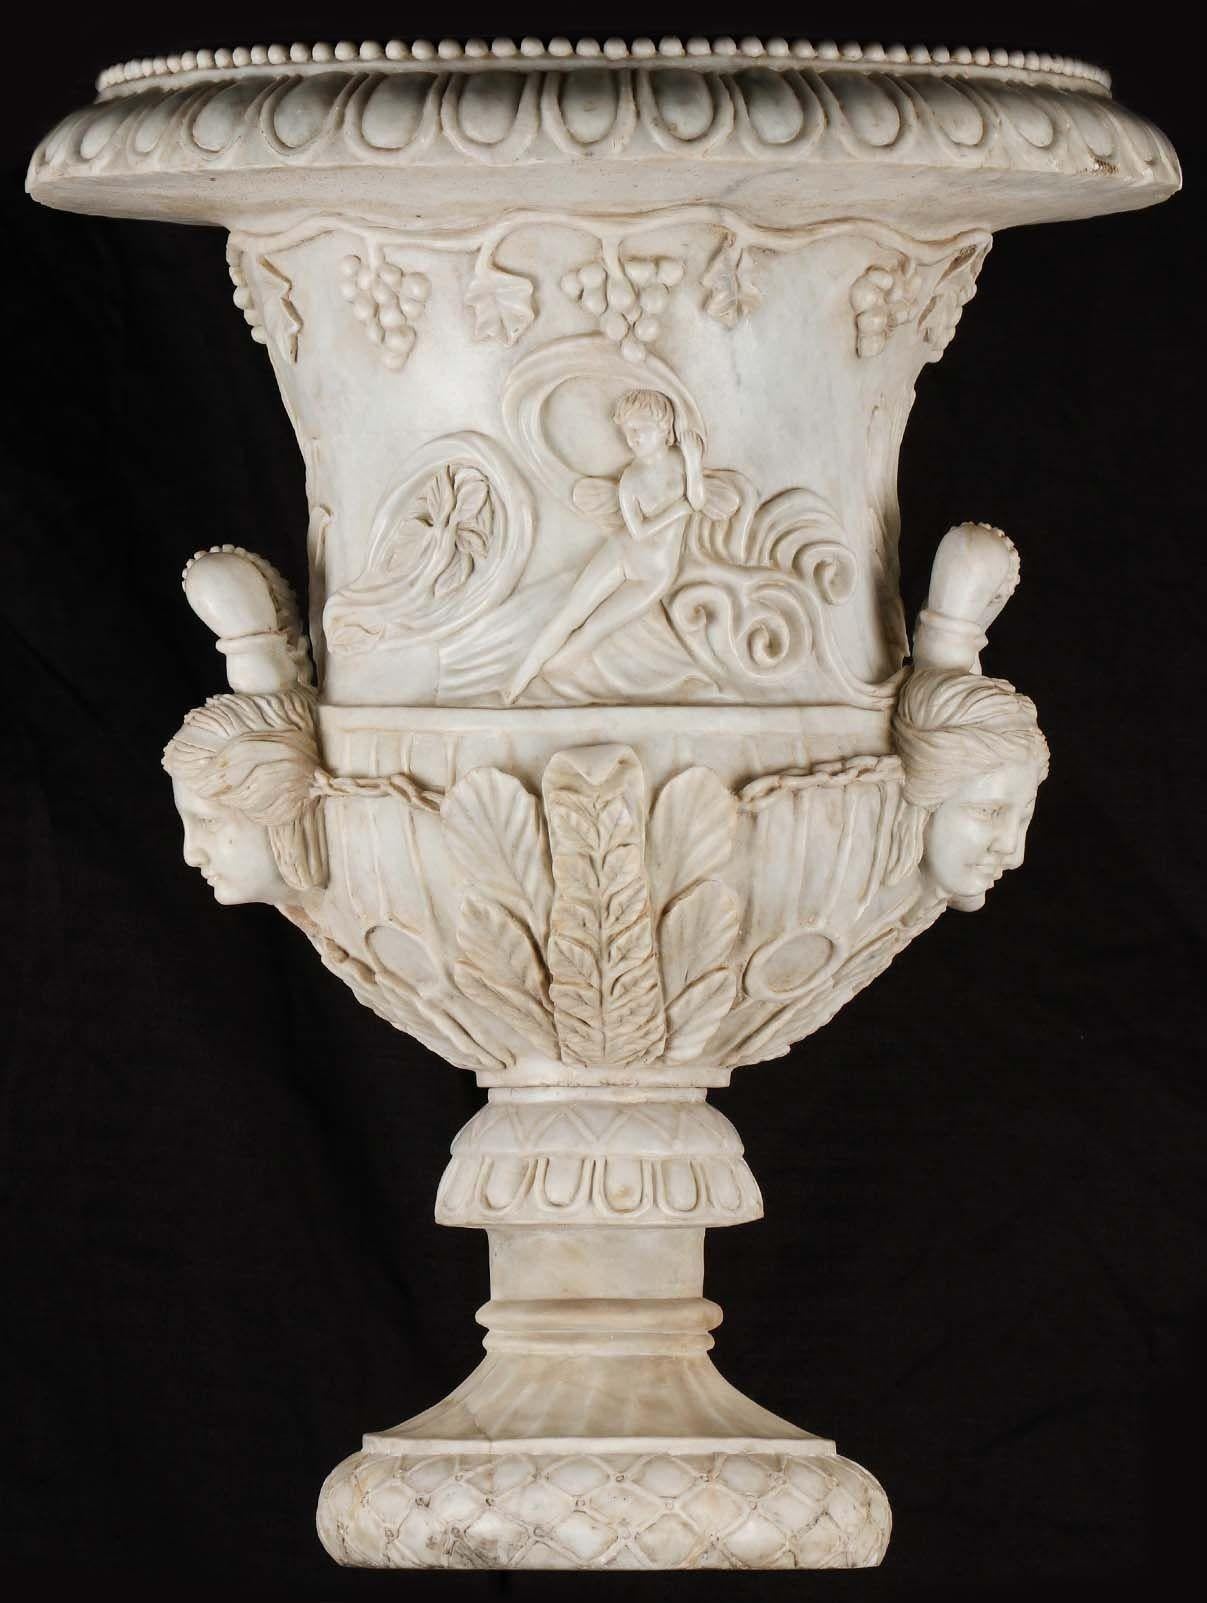 Pair of beautiful bell-shaped palatial garden urns carved with fine white marble depicting classical imagery of female figures and grapevines. Inspired by the ancient Roman-era Medici vase. 
Made in Italy, Late 18th-Early 19th Century.
About the